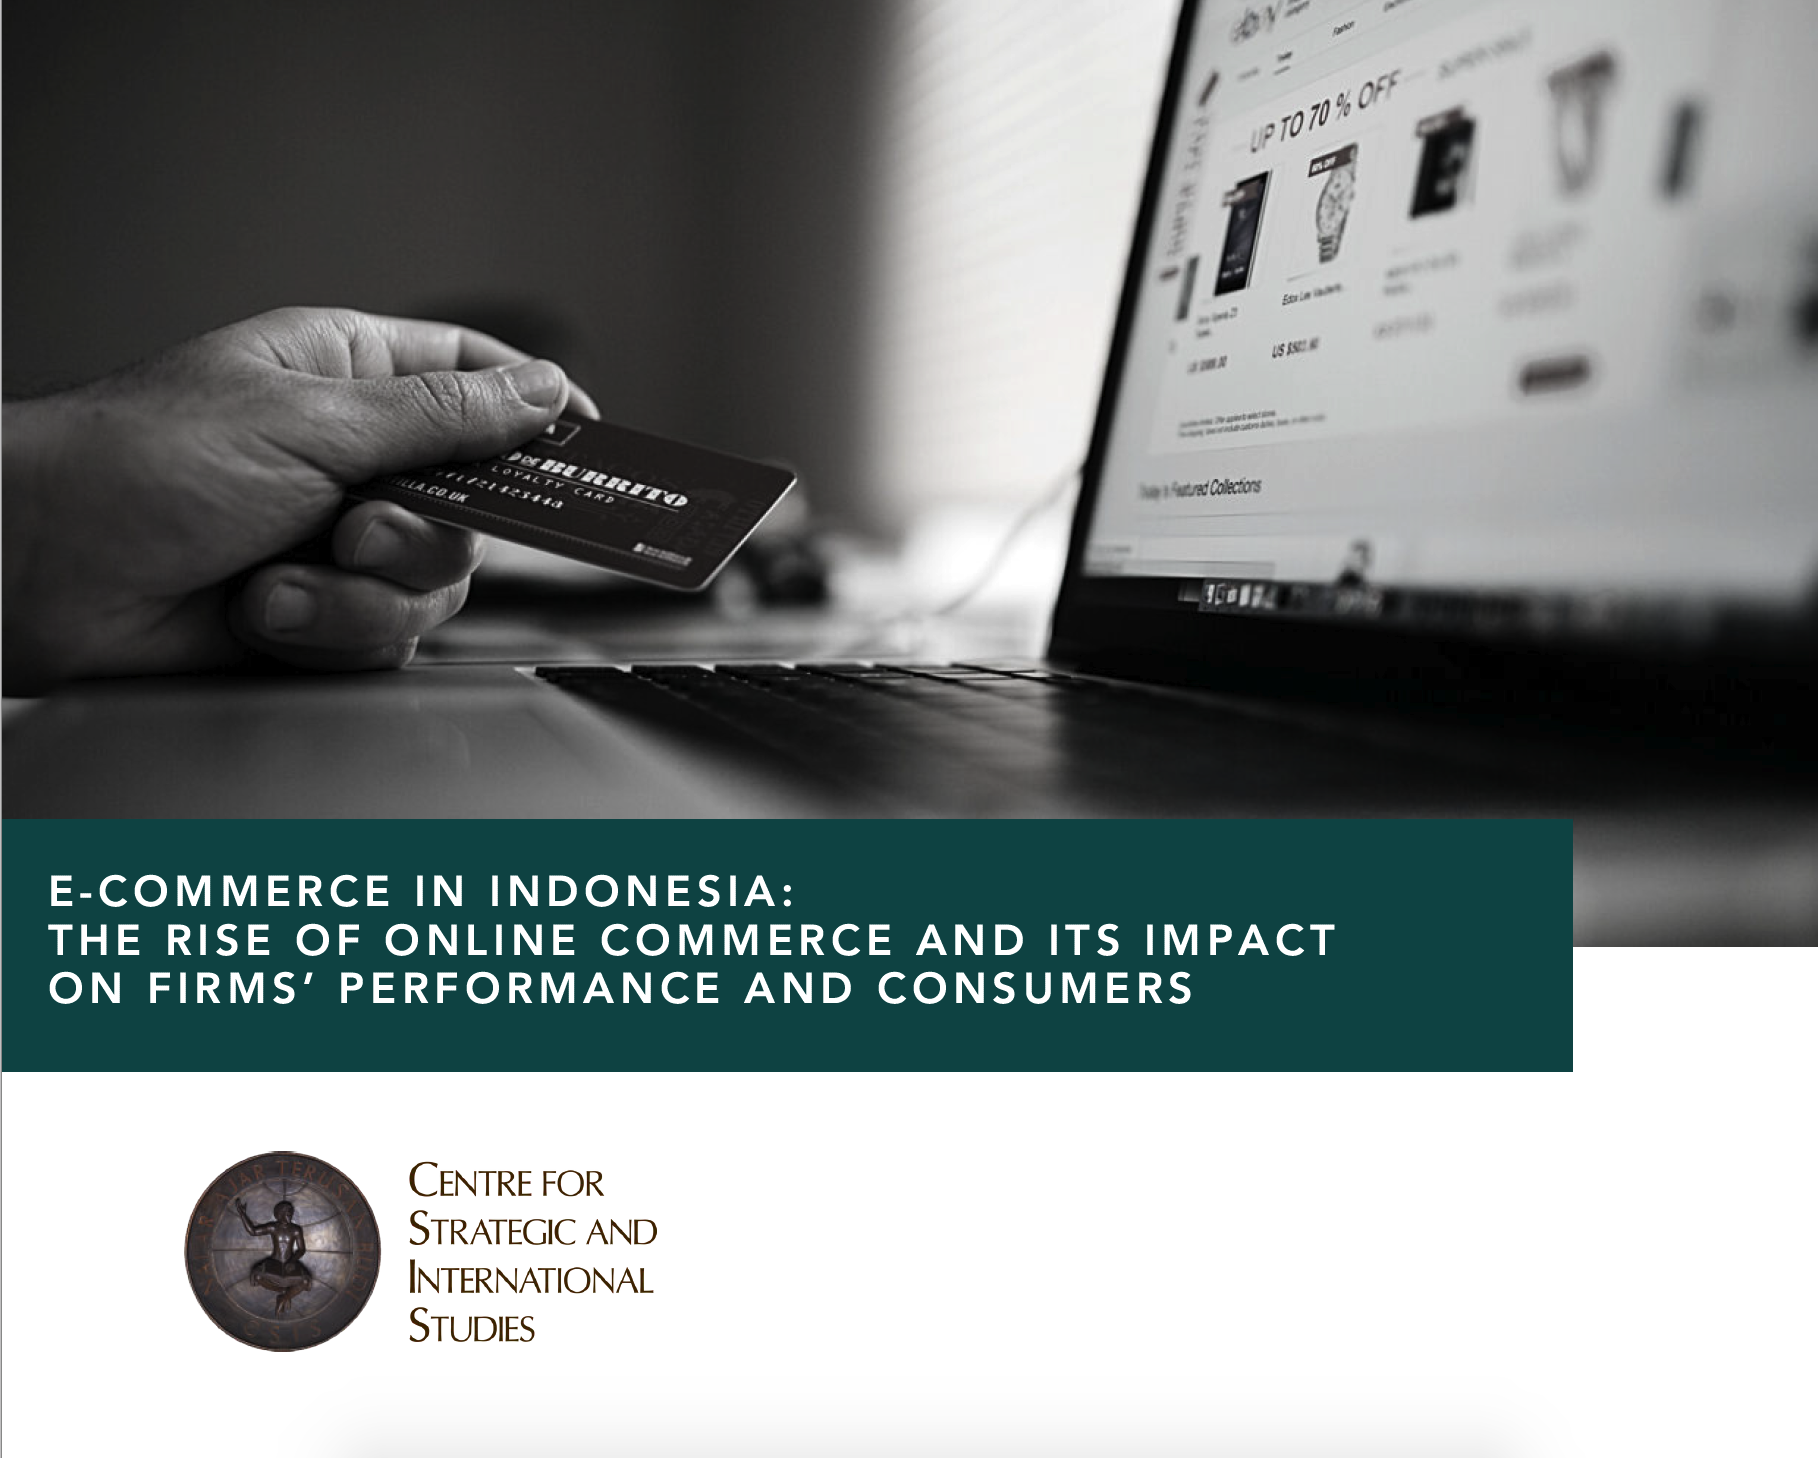 E-commerce in Indonesia: The Rise of Online Commerce and its Impact on Firms’ Performance and Consumers